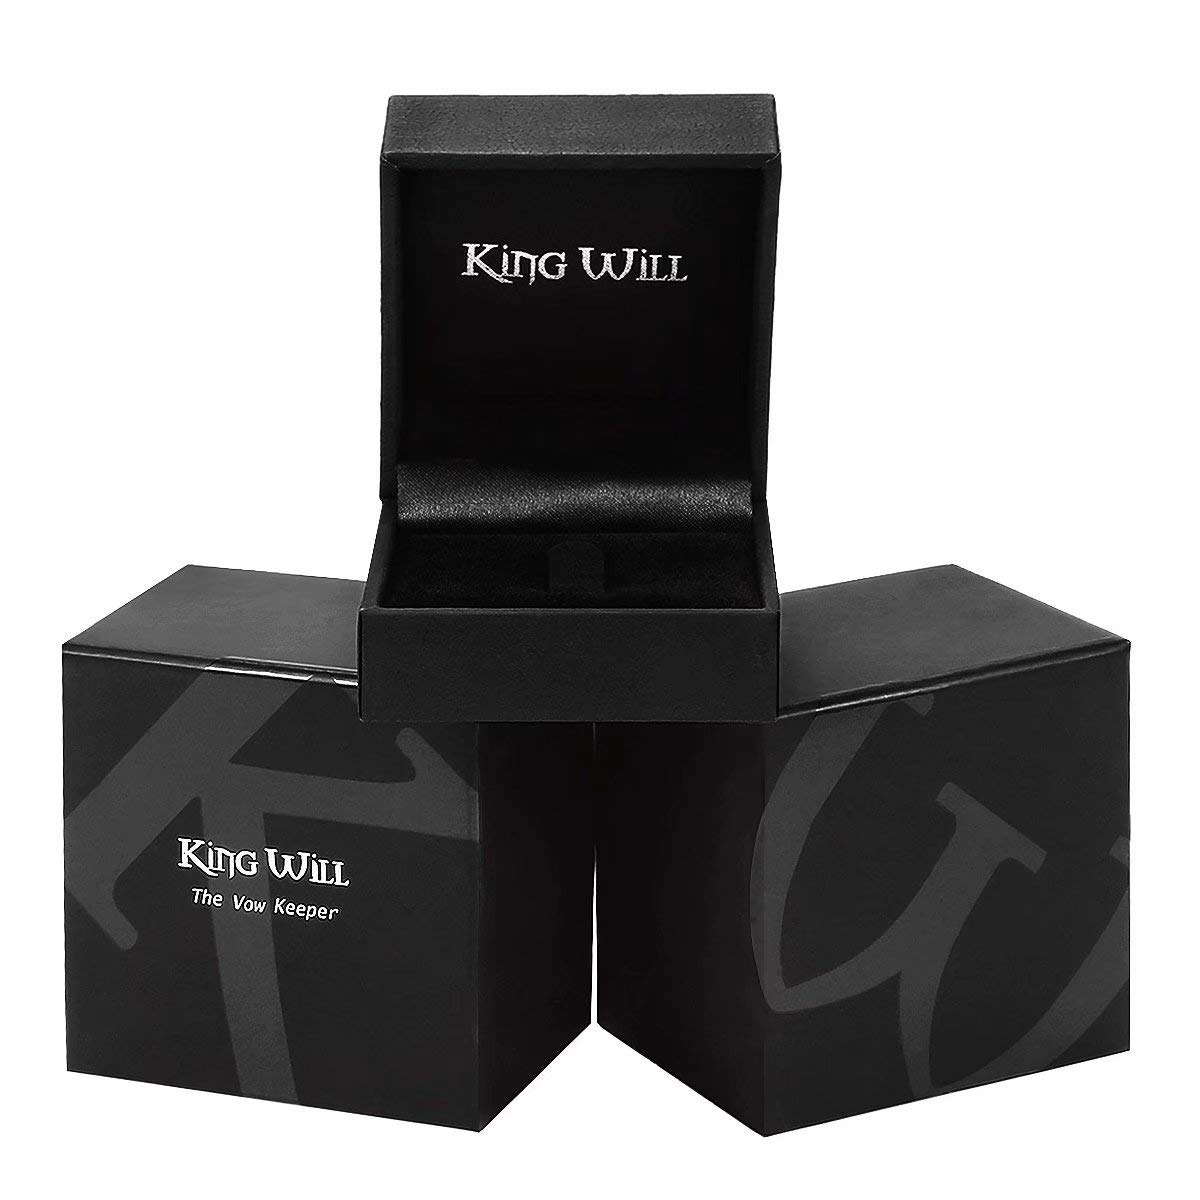 King Will Classic Tungsten Carbide Wedding Band Ring for Men - Available in Black, Silver, Gold, Blue, Brown, Red, and Purple Grooved Center Comfort Fit Suitable For Every Day Wear